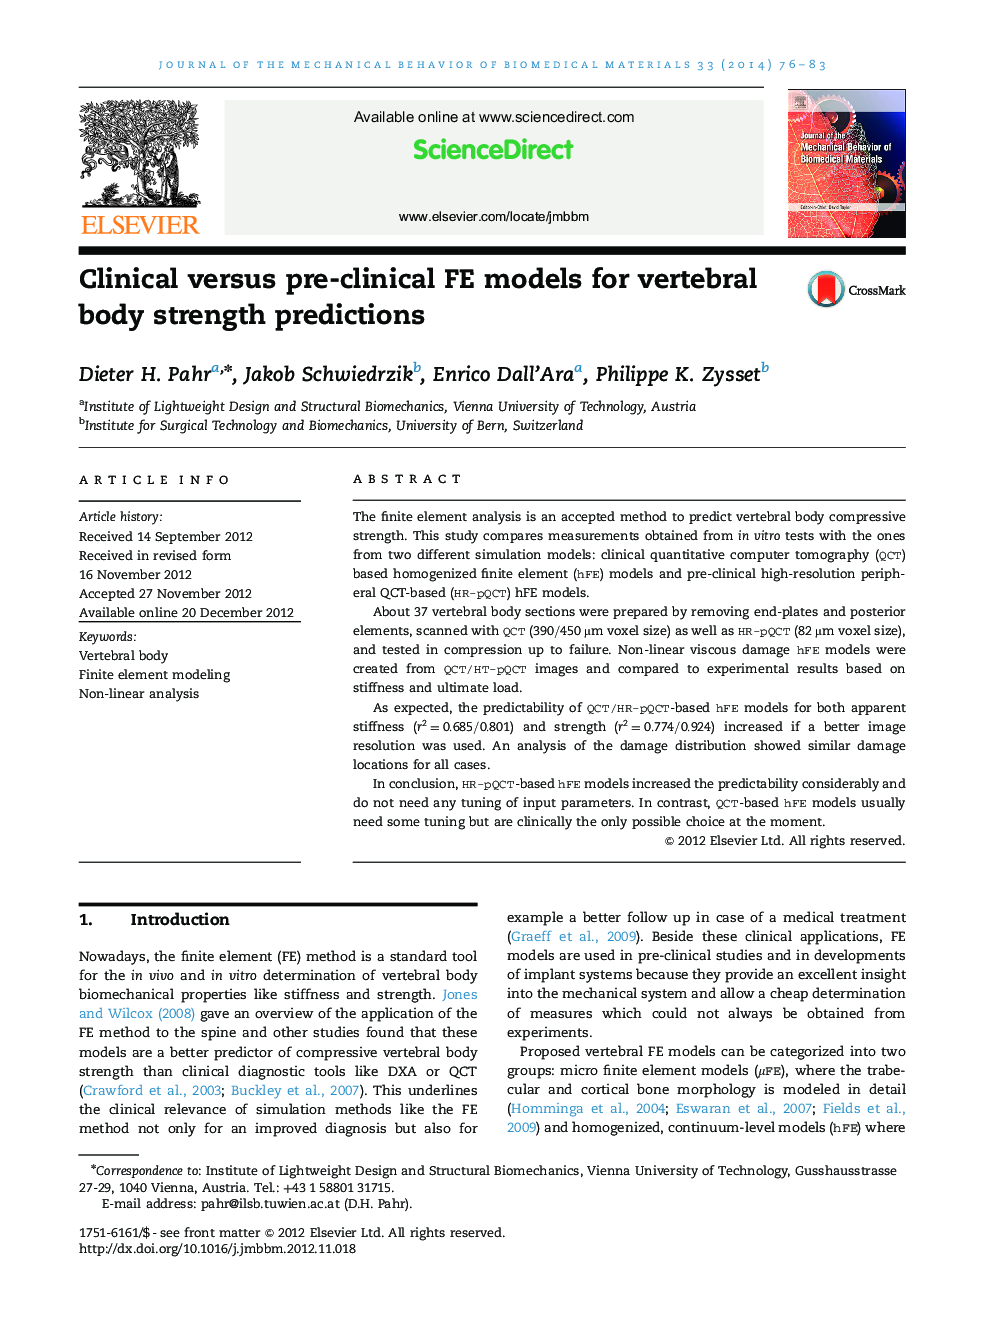 Clinical versus pre-clinical FE models for vertebral body strength predictions